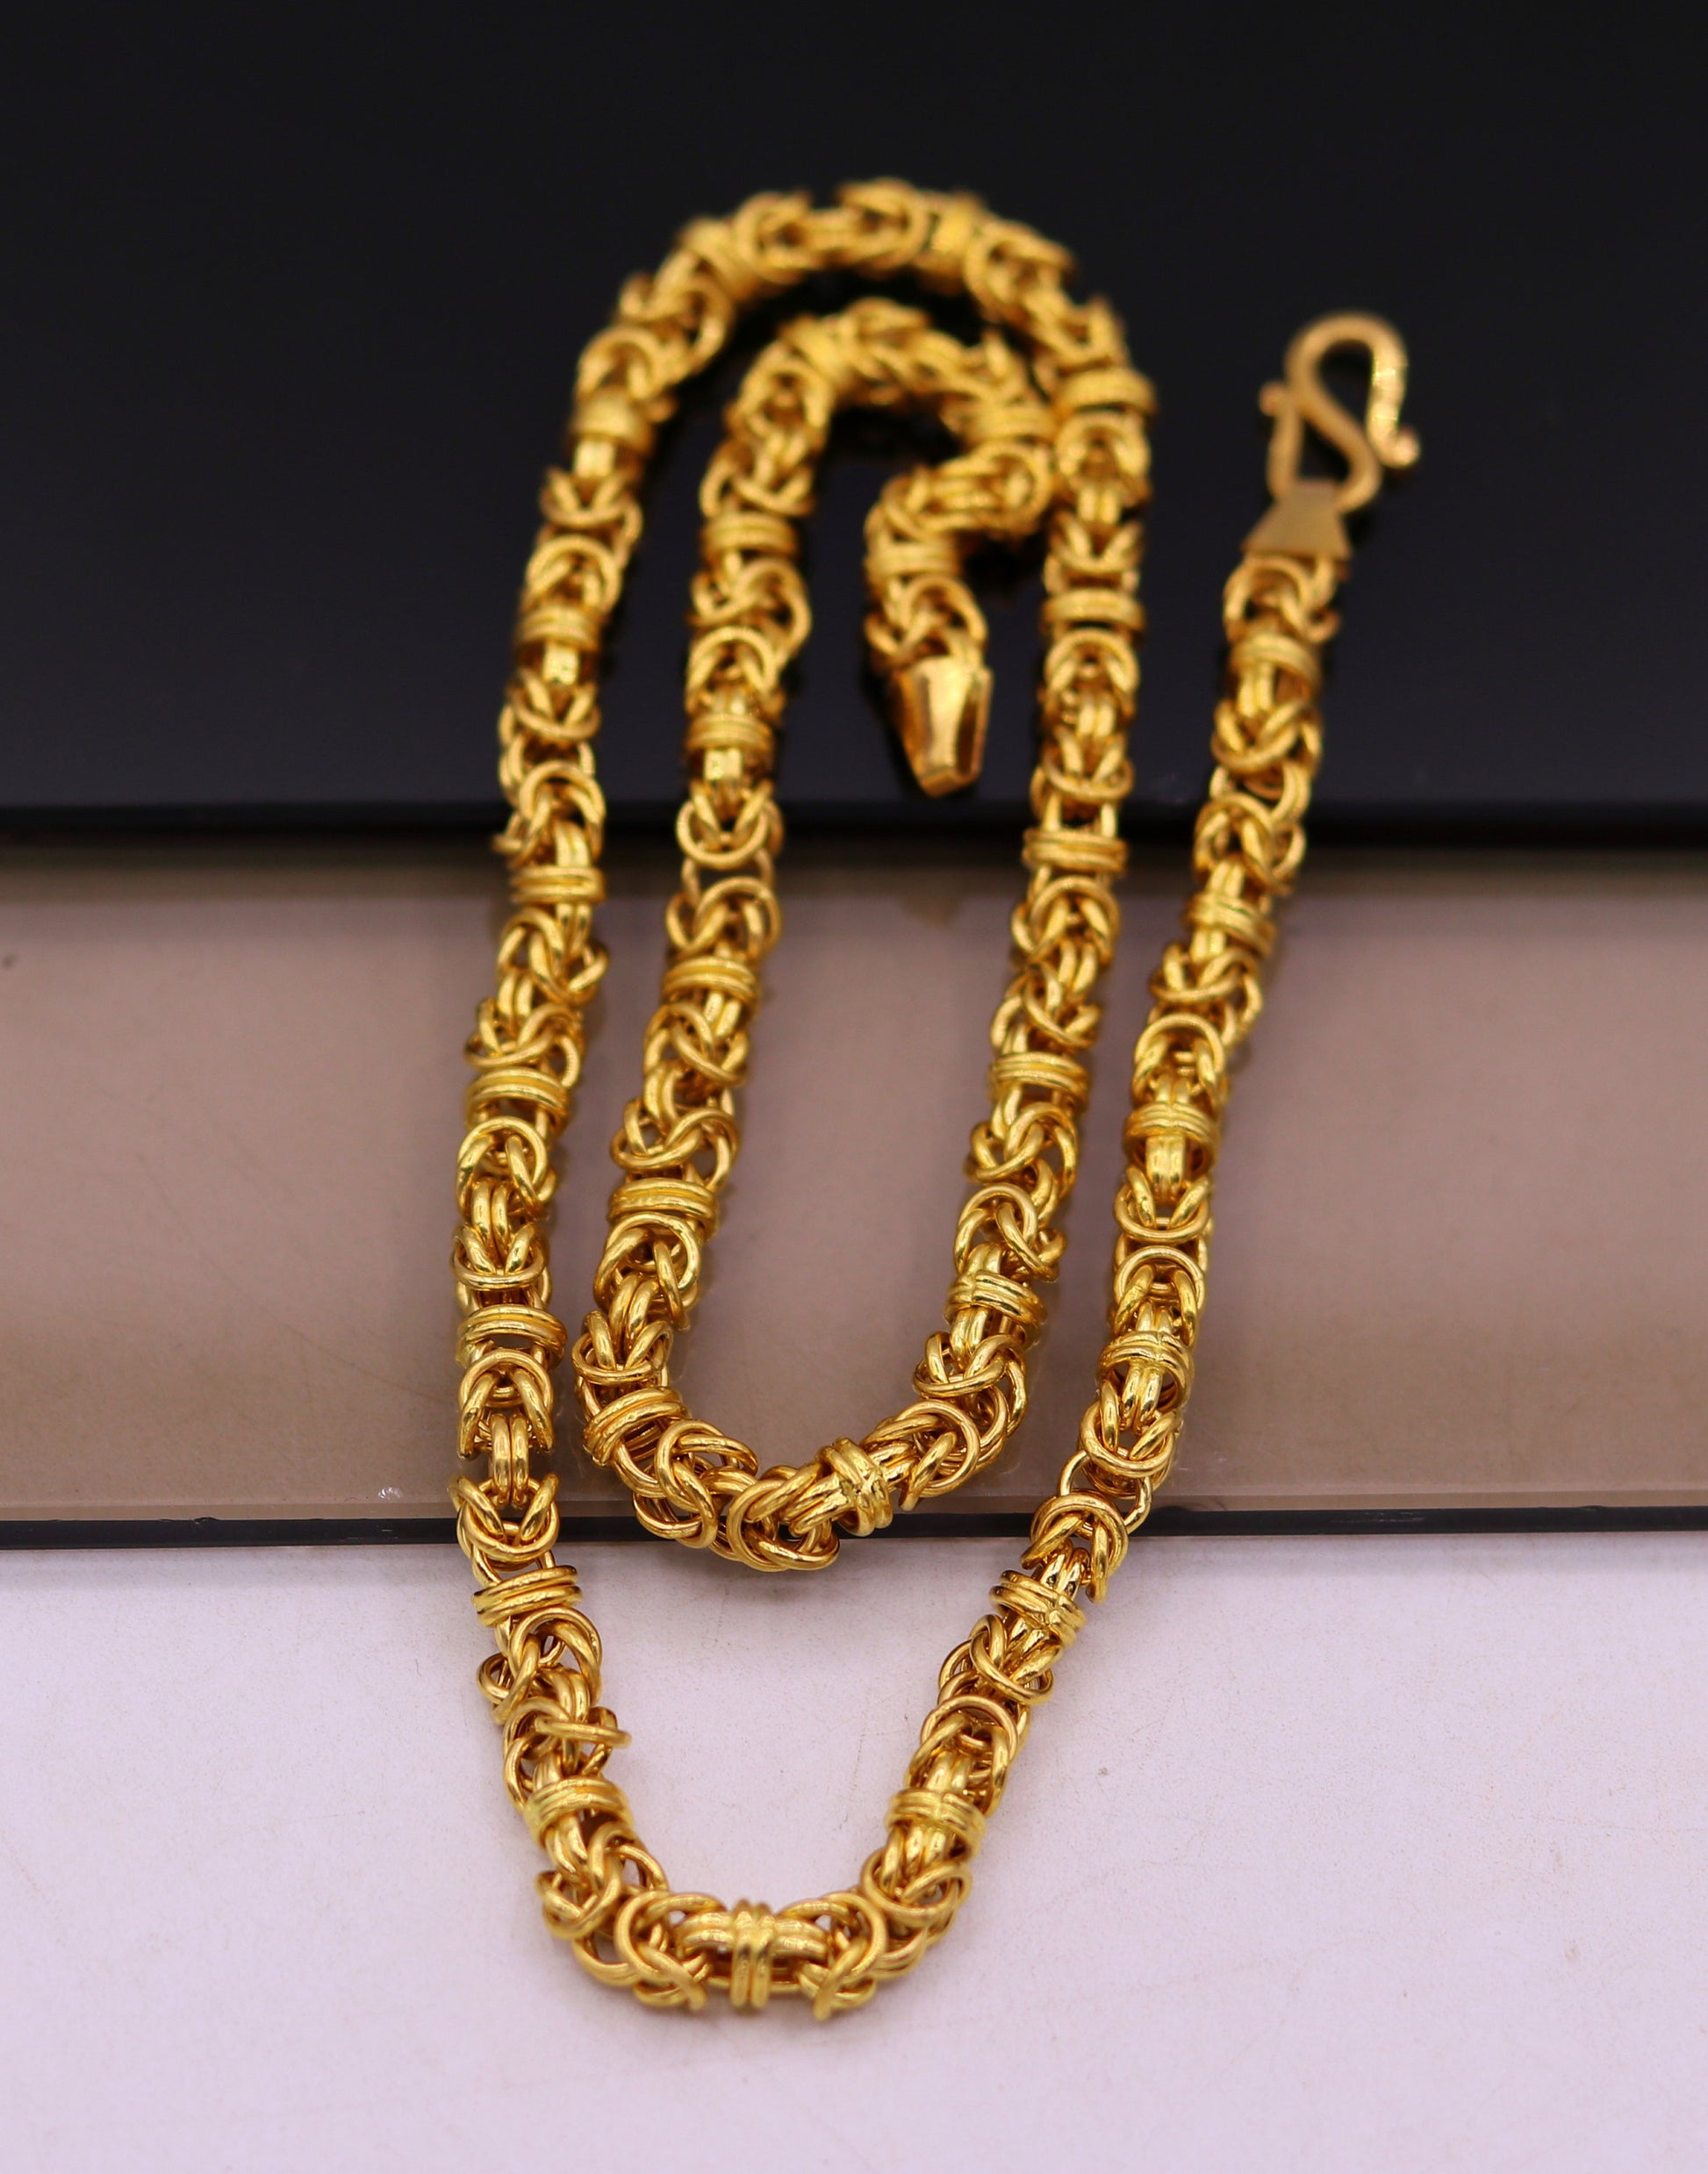 New stylish 22kt yellow gold handmade fabulous byzantine chain necklace unisex gifting unisex jewelry from rajasthan india - TRIBAL ORNAMENTS